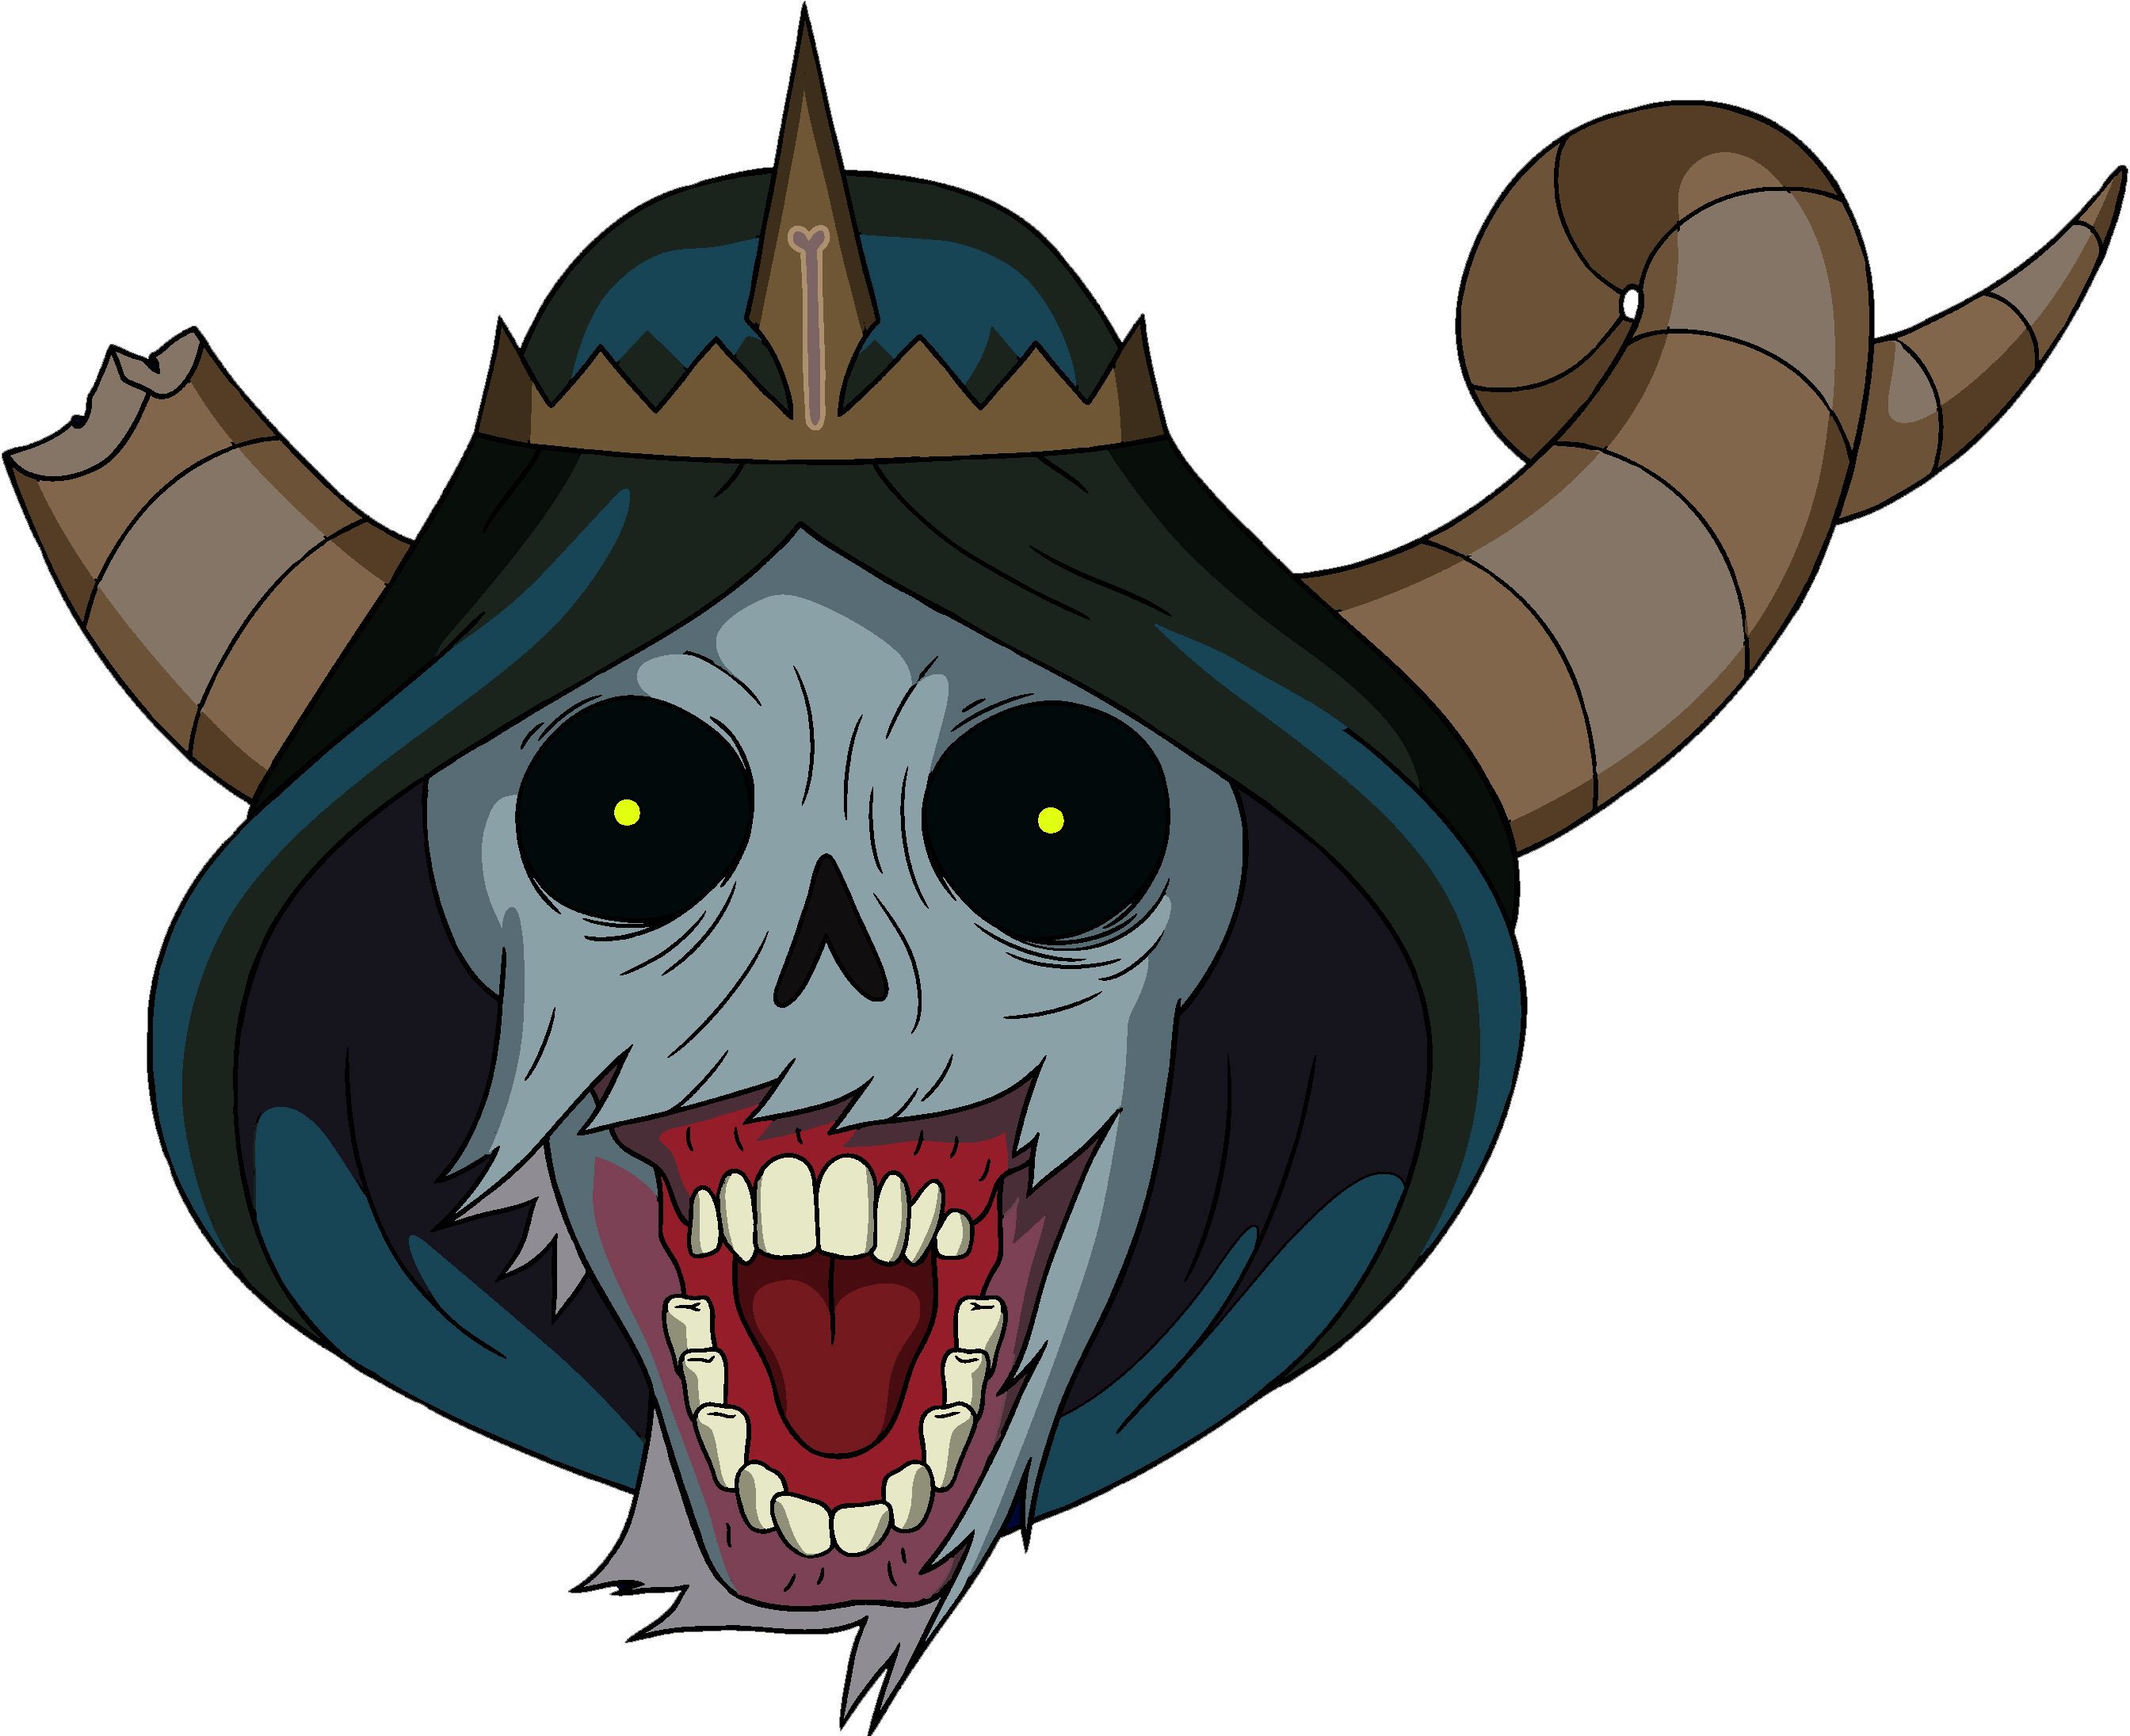 Marceline The Vampire Queen Ice King Finn The Human - Lich Adventure Time Quotes (2688x2191)